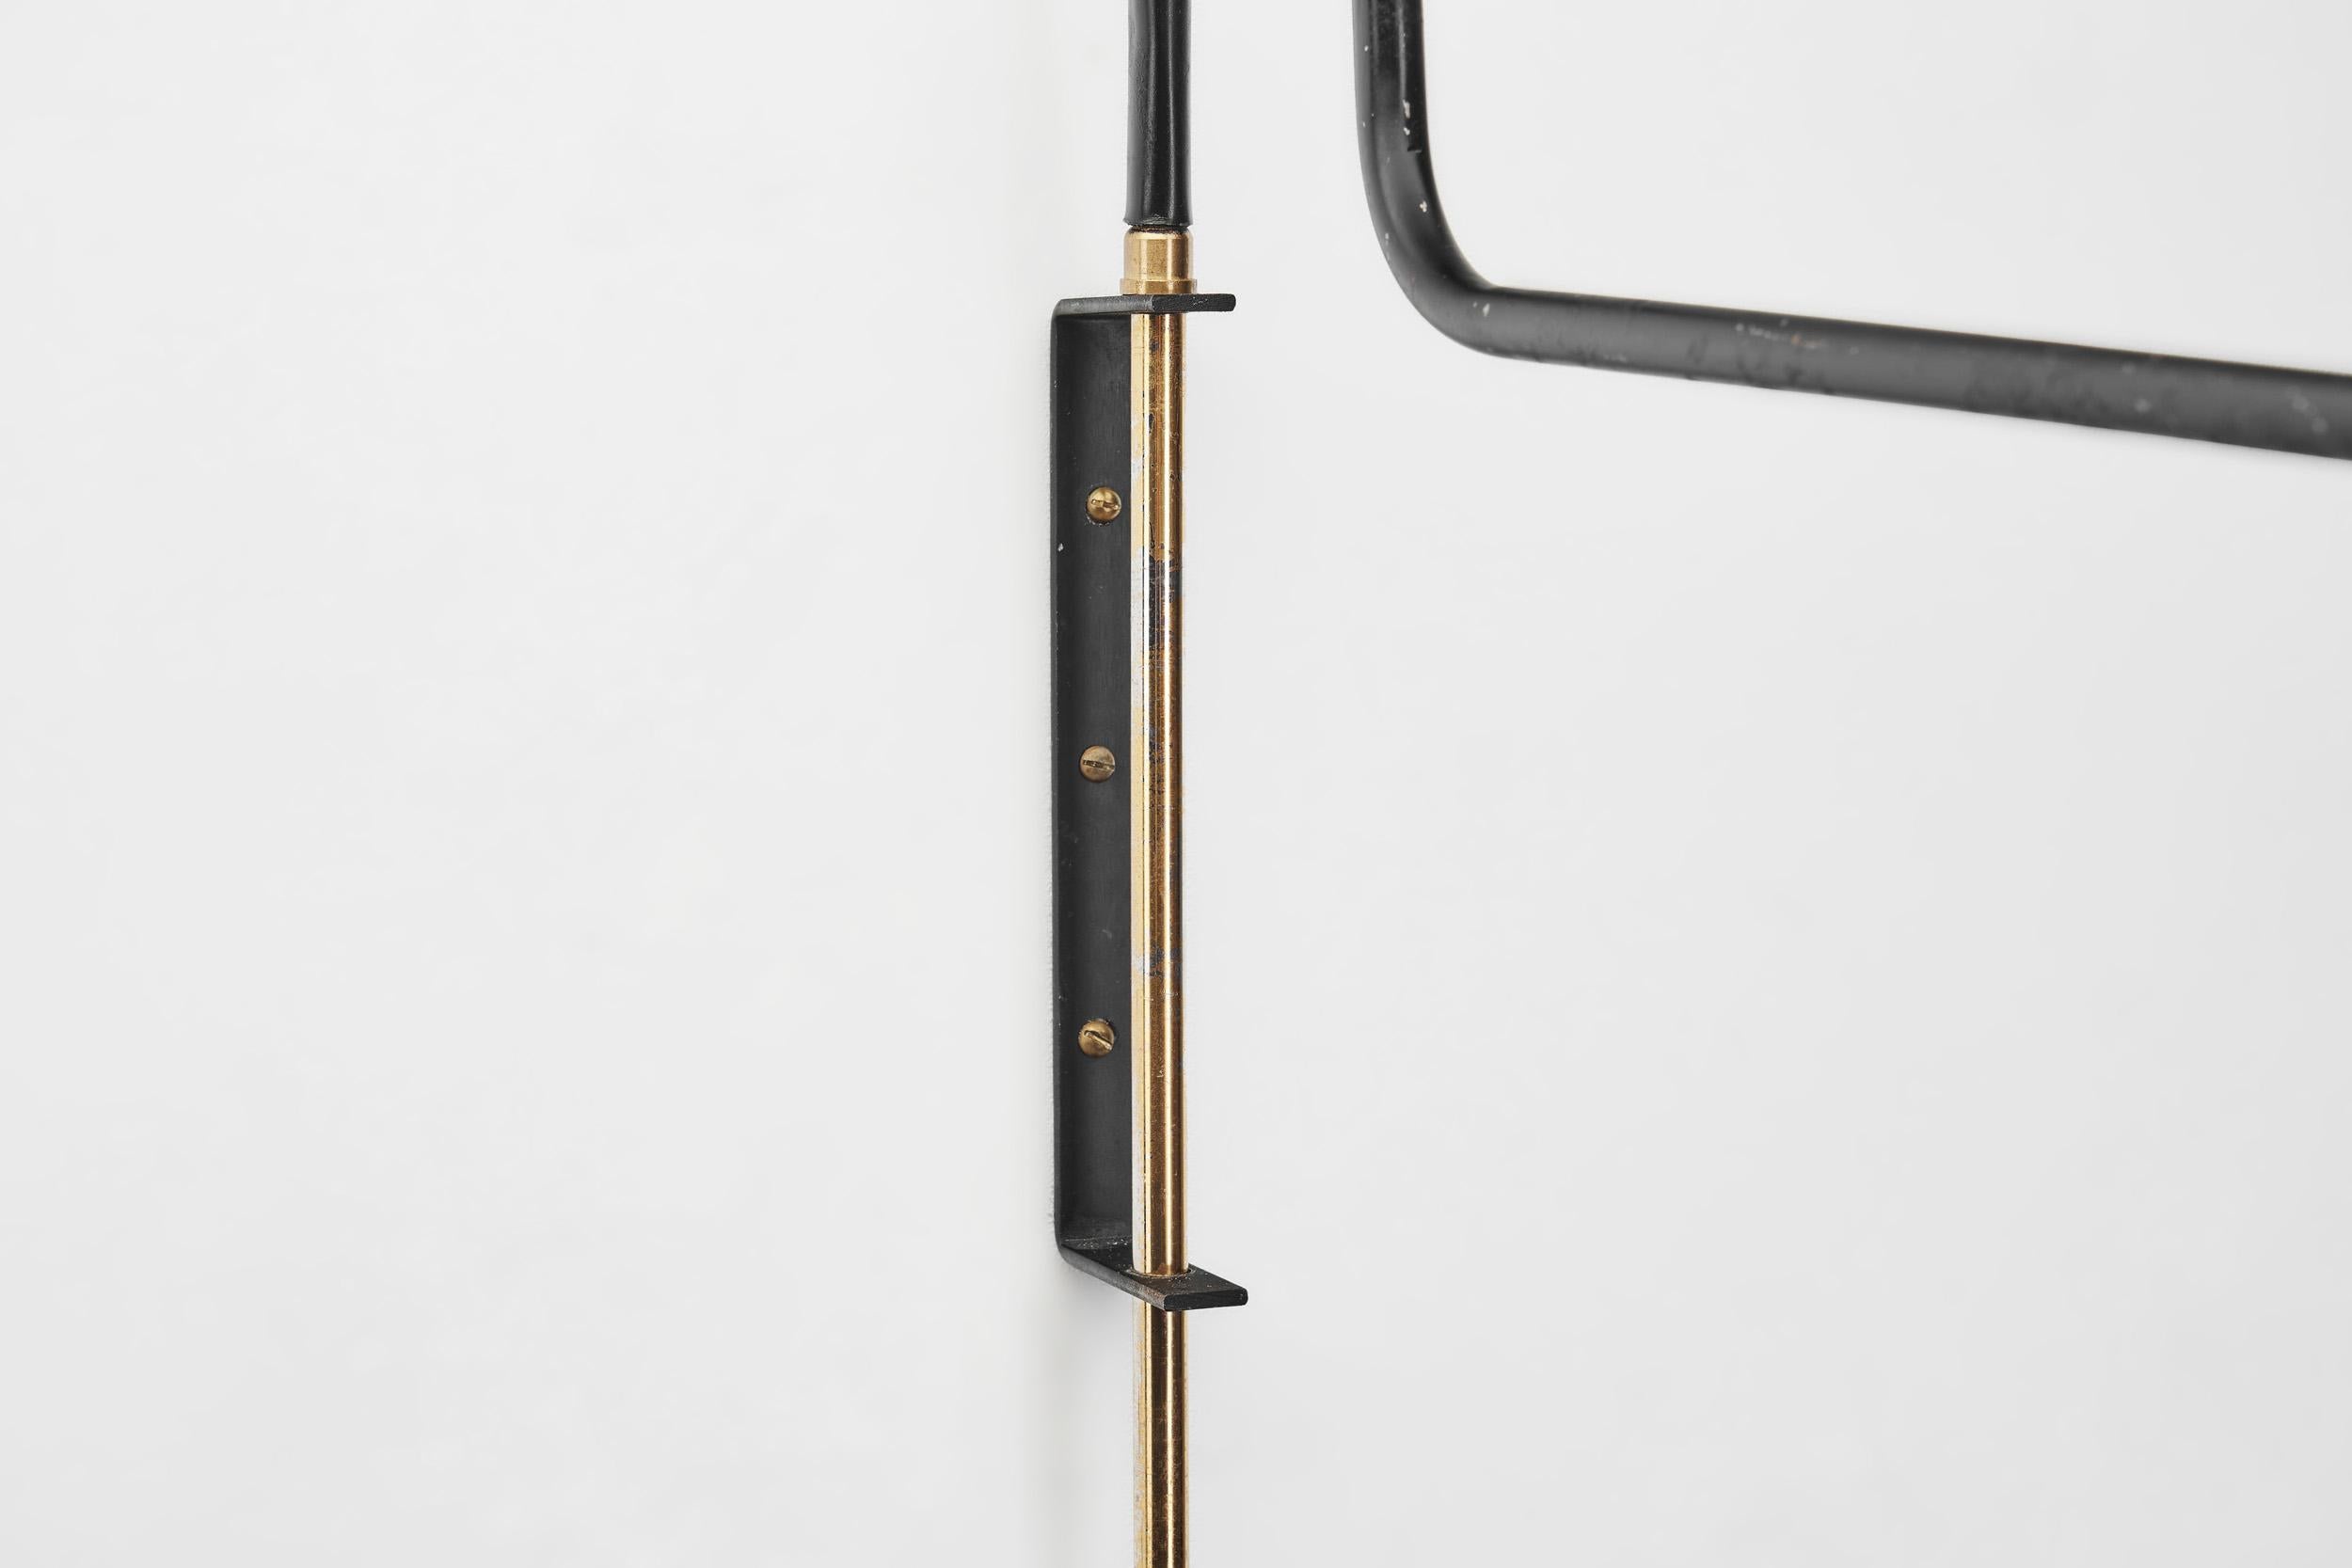 Black and Gold Lacquered Metal Wall Light, Europe, circa 1950s For Sale 3